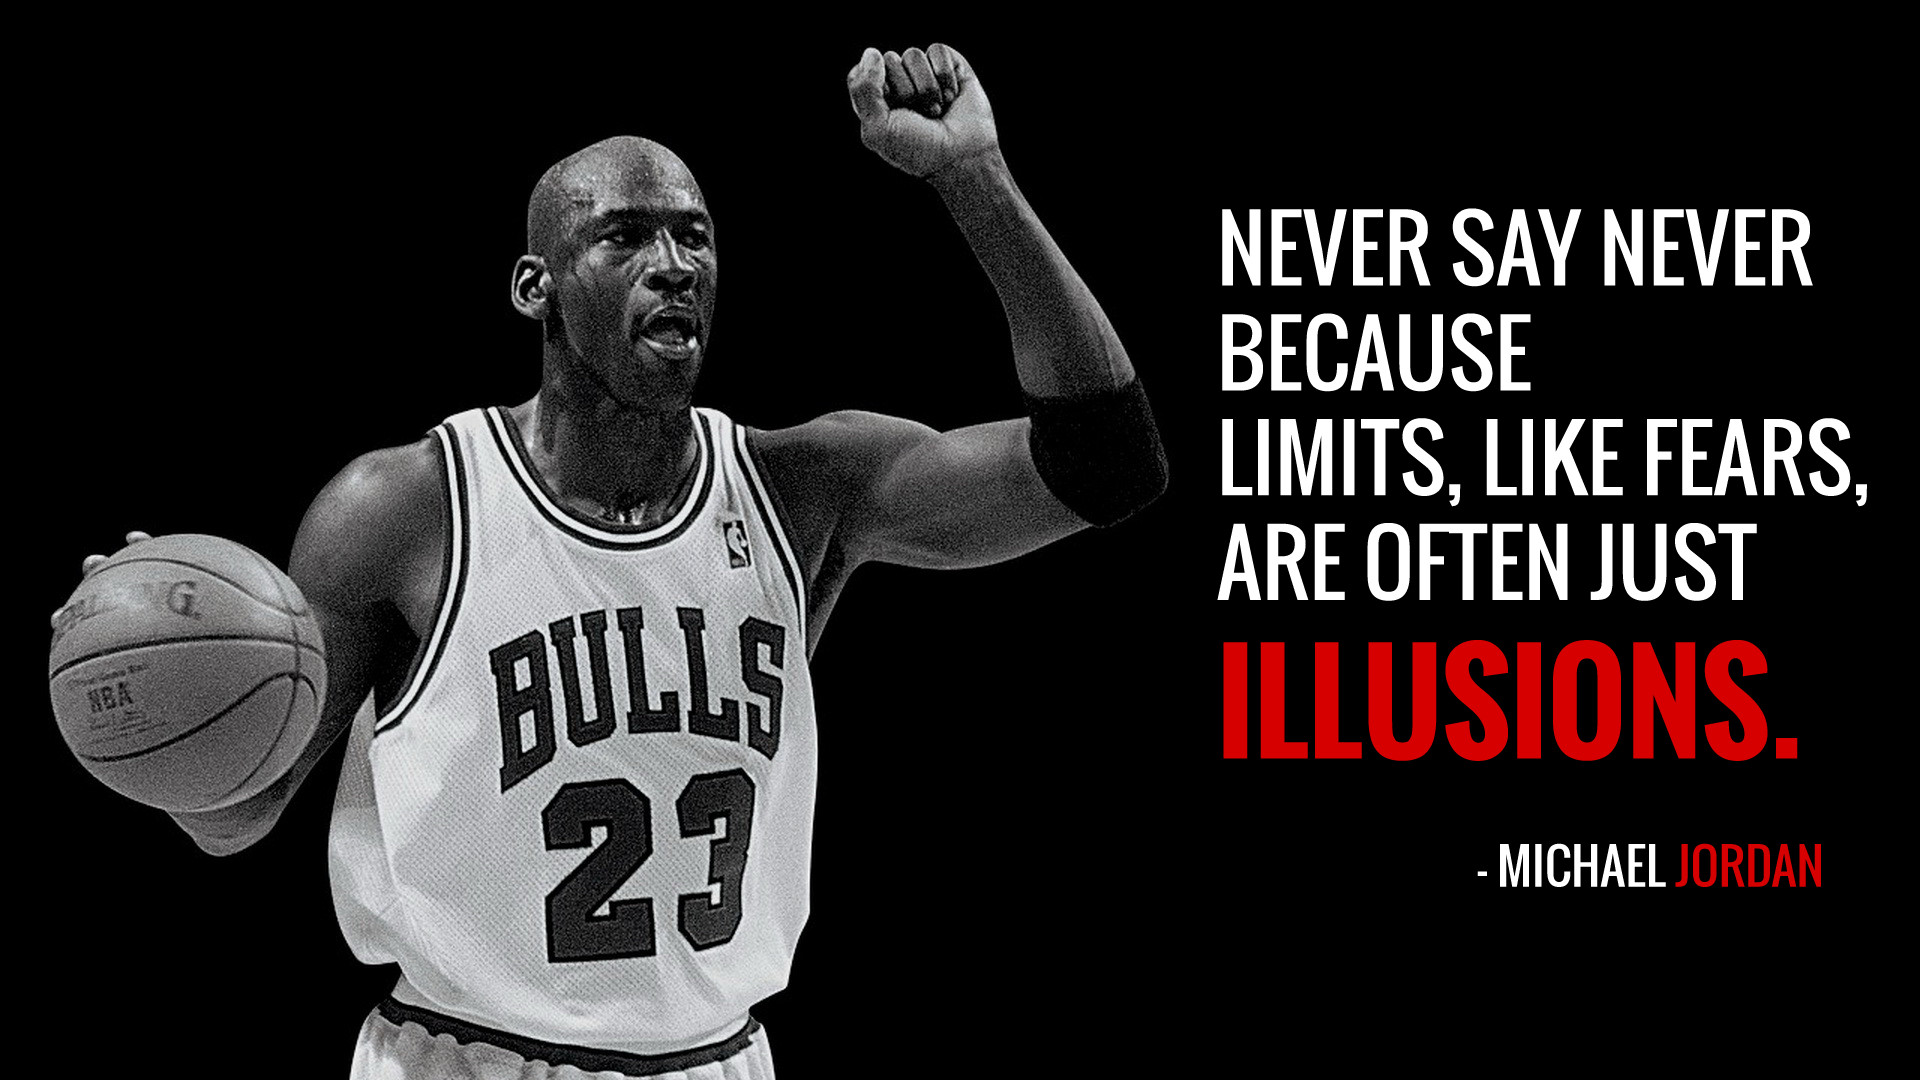 Motivational Athlete Quotes
 15 Inspirational Sports Quotes that will lift your spirits